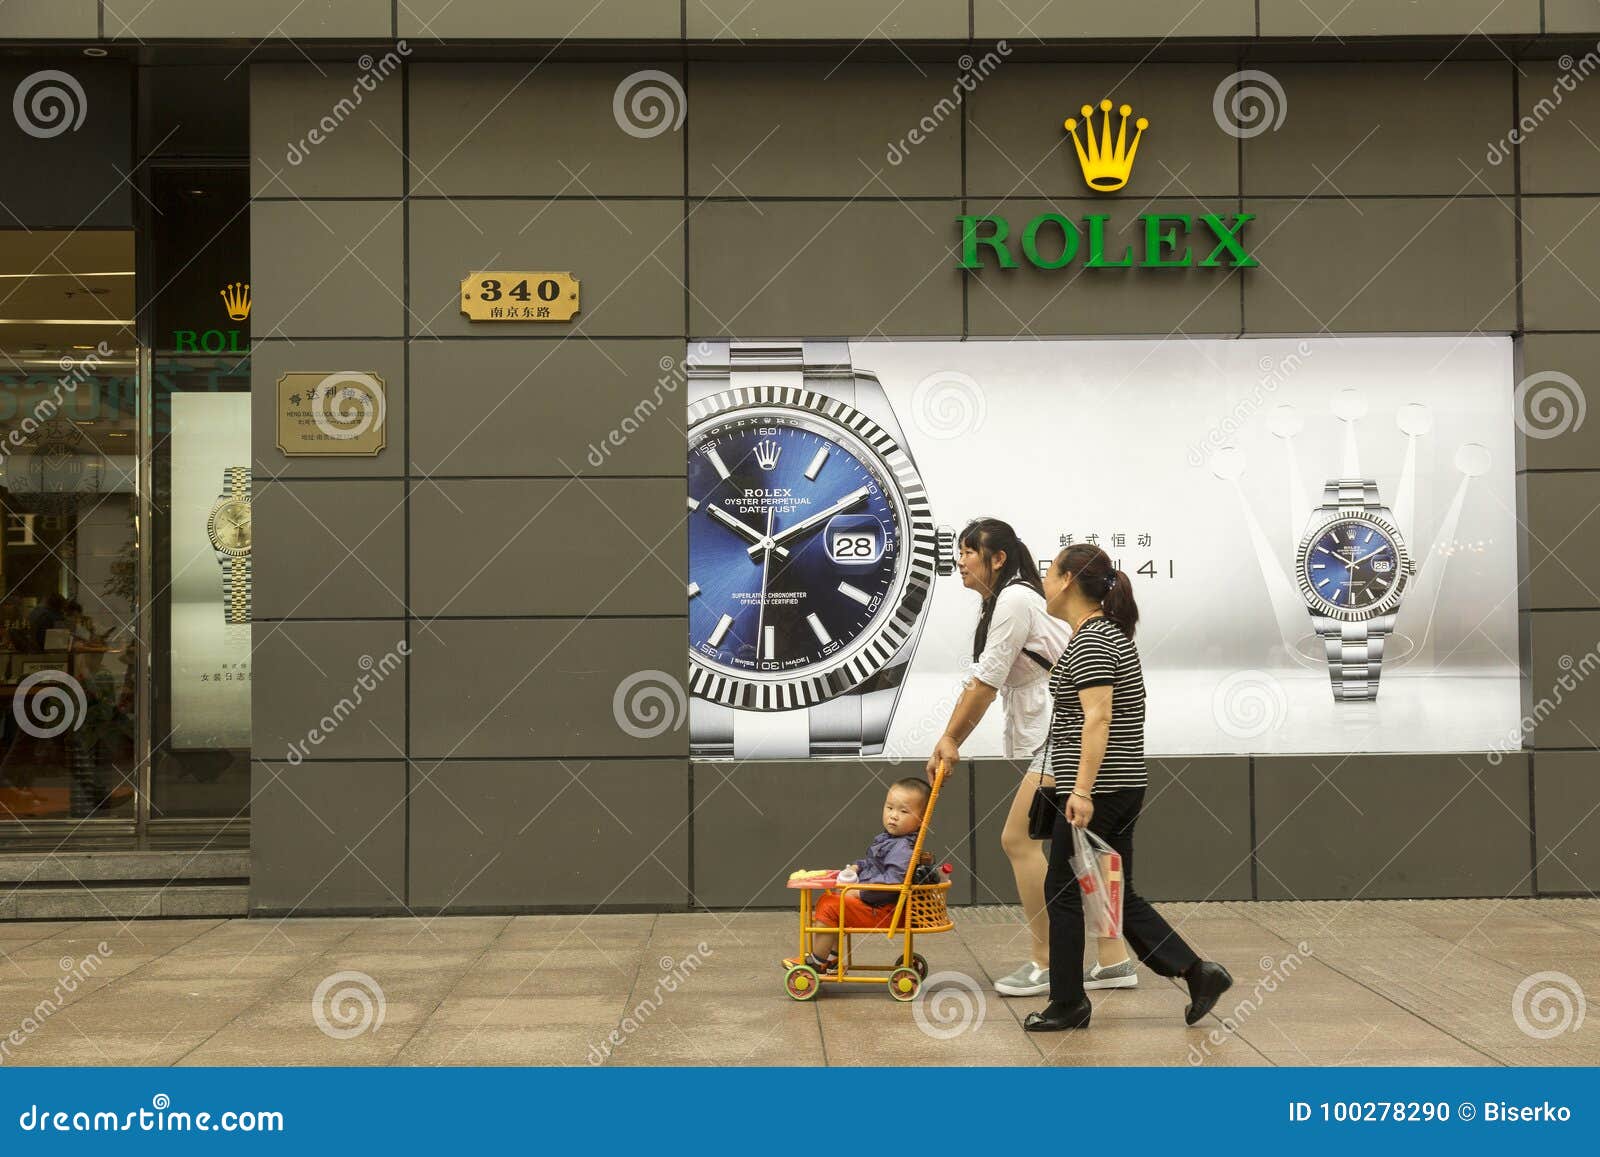 biggest rolex store in the world